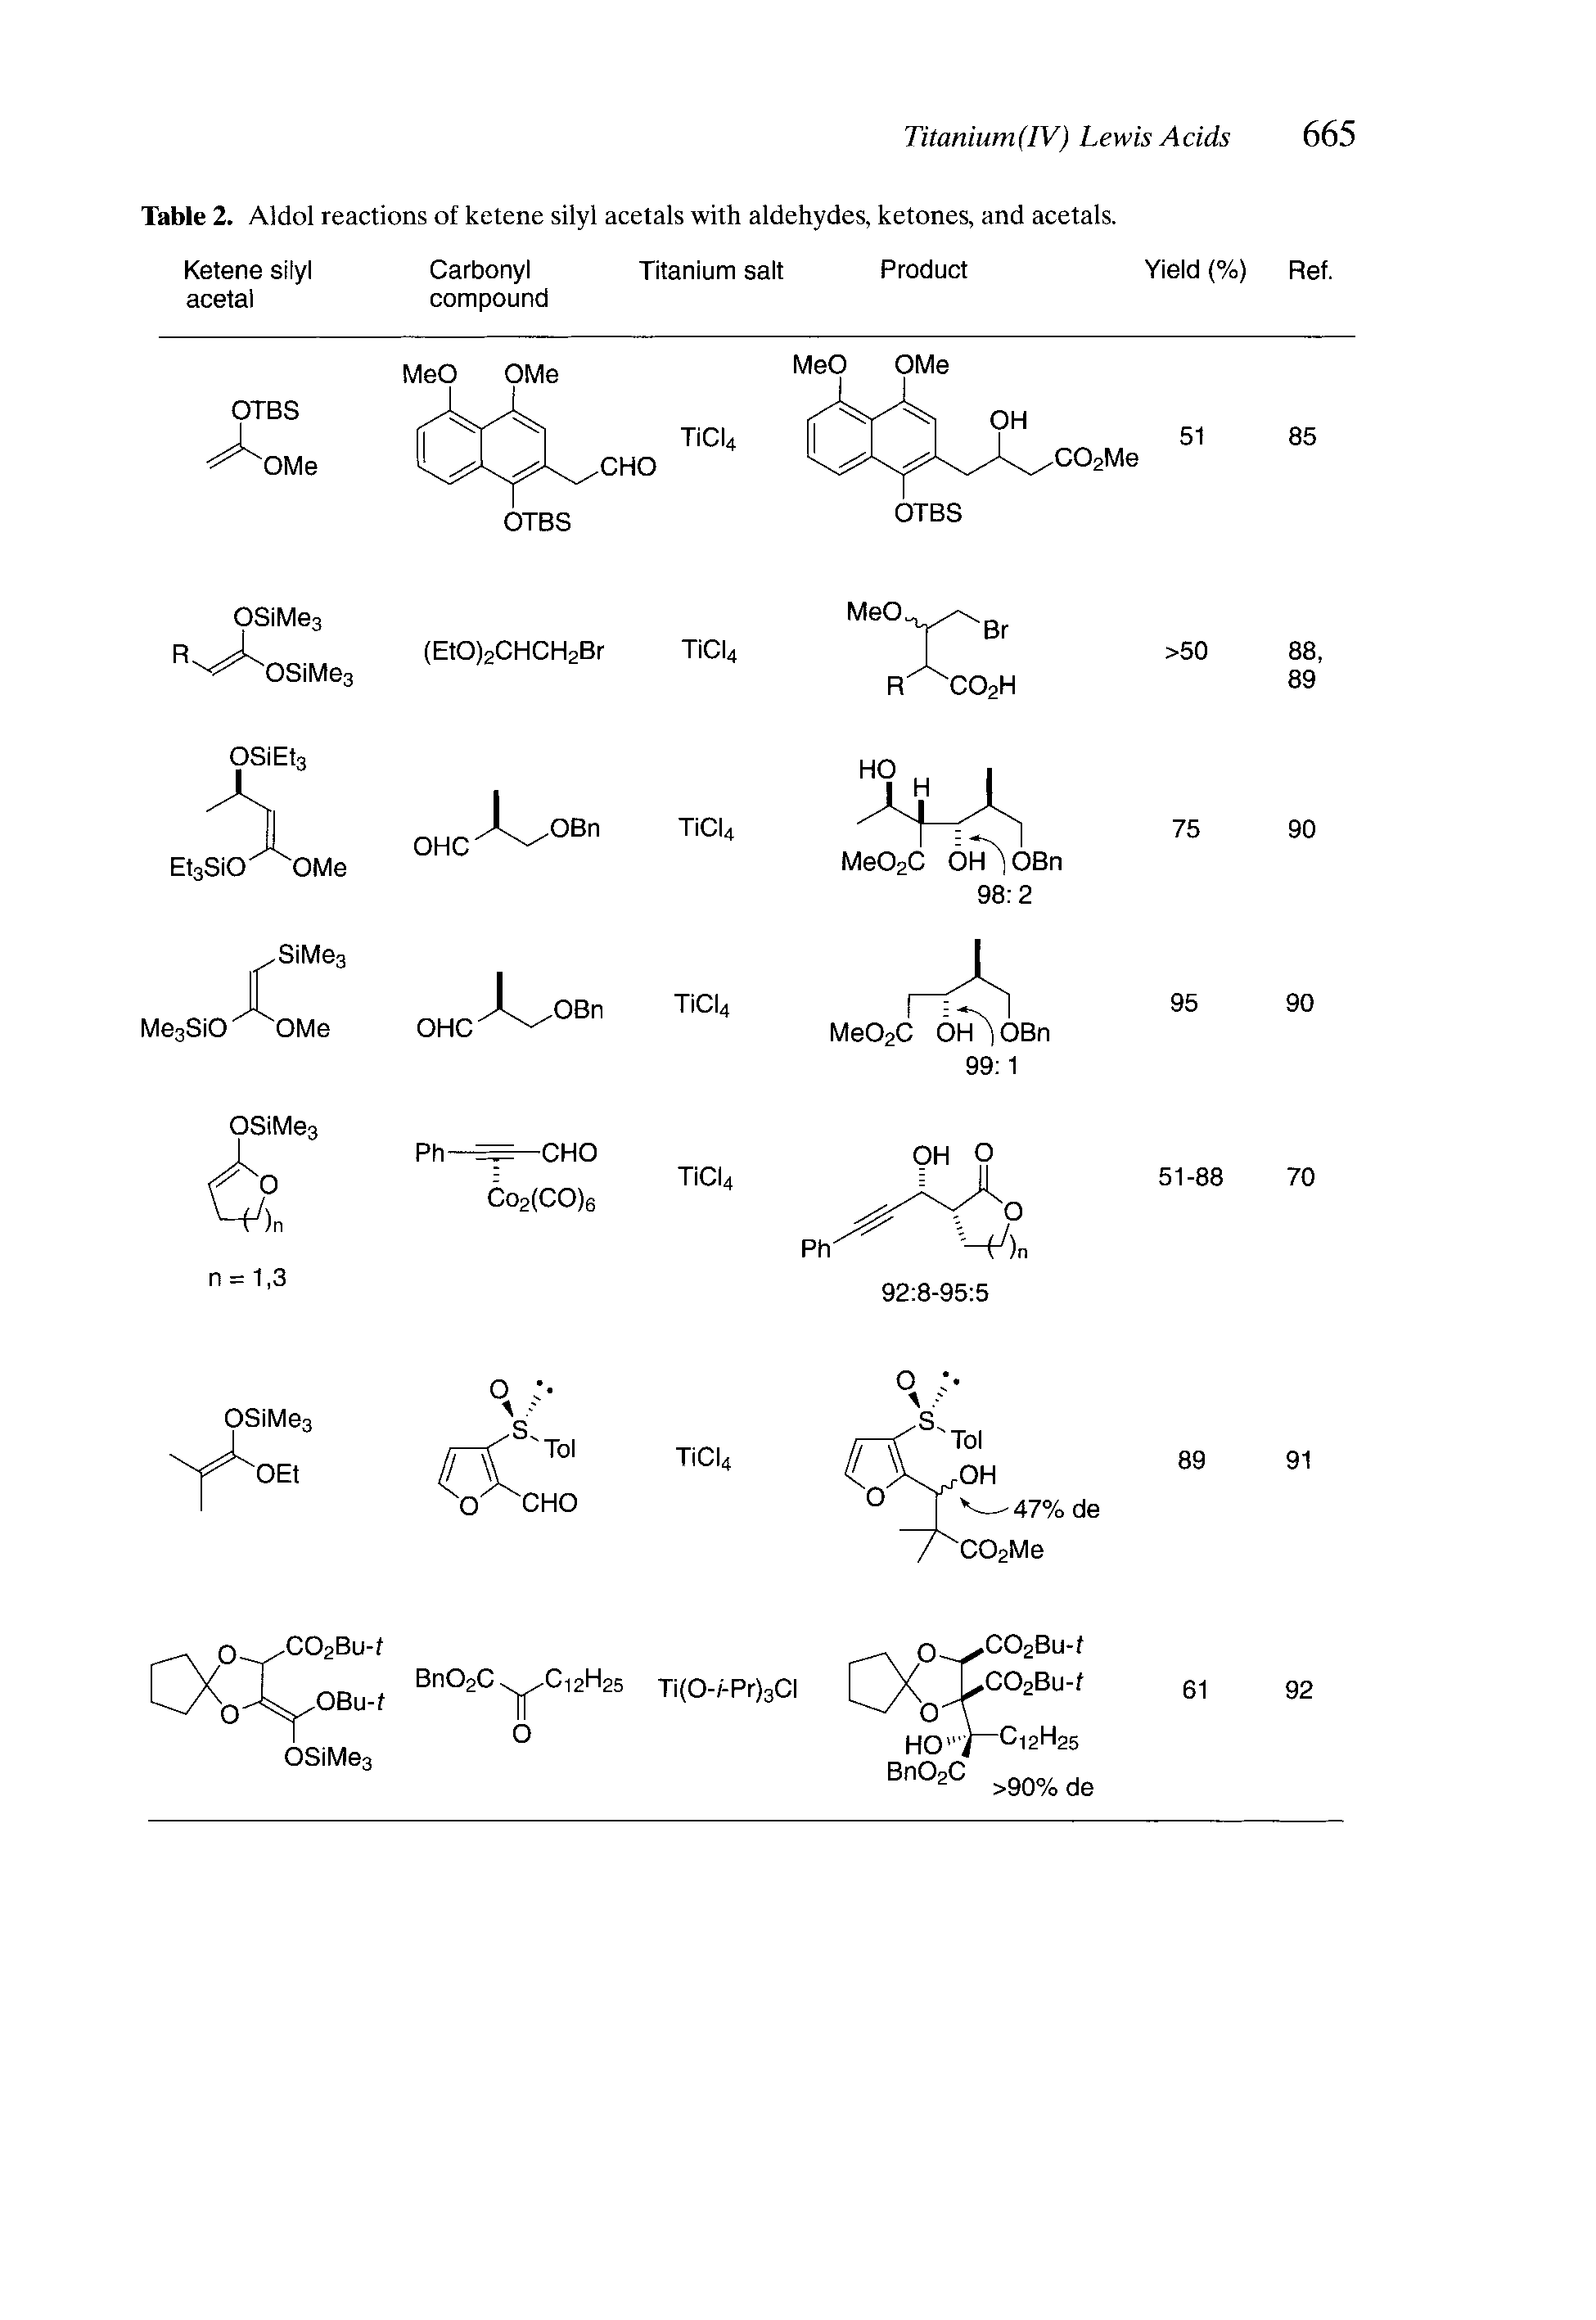 Table 2. Aldol reactions of ketene silyl acetals with aldehydes, ketones, and acetals.